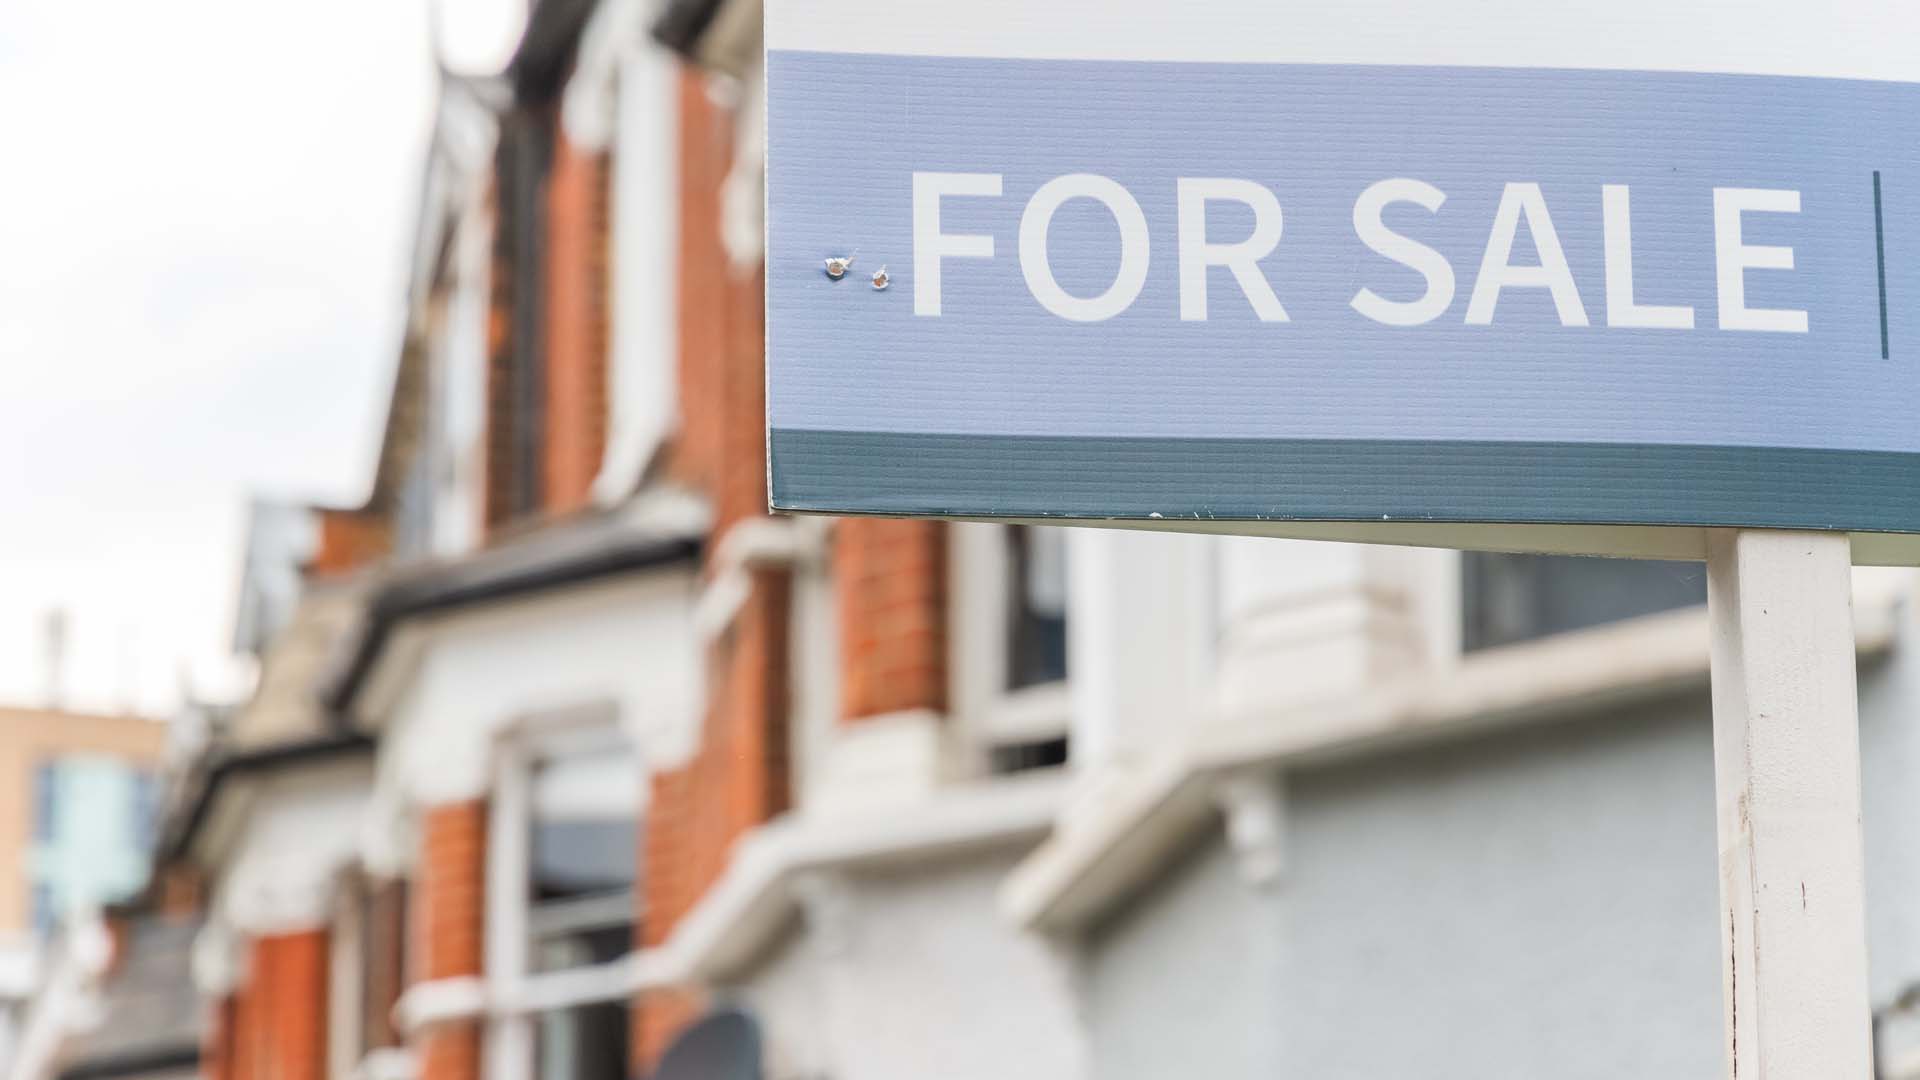 For Sale signs displayed outside terraced houses in Harringay Ladder, London